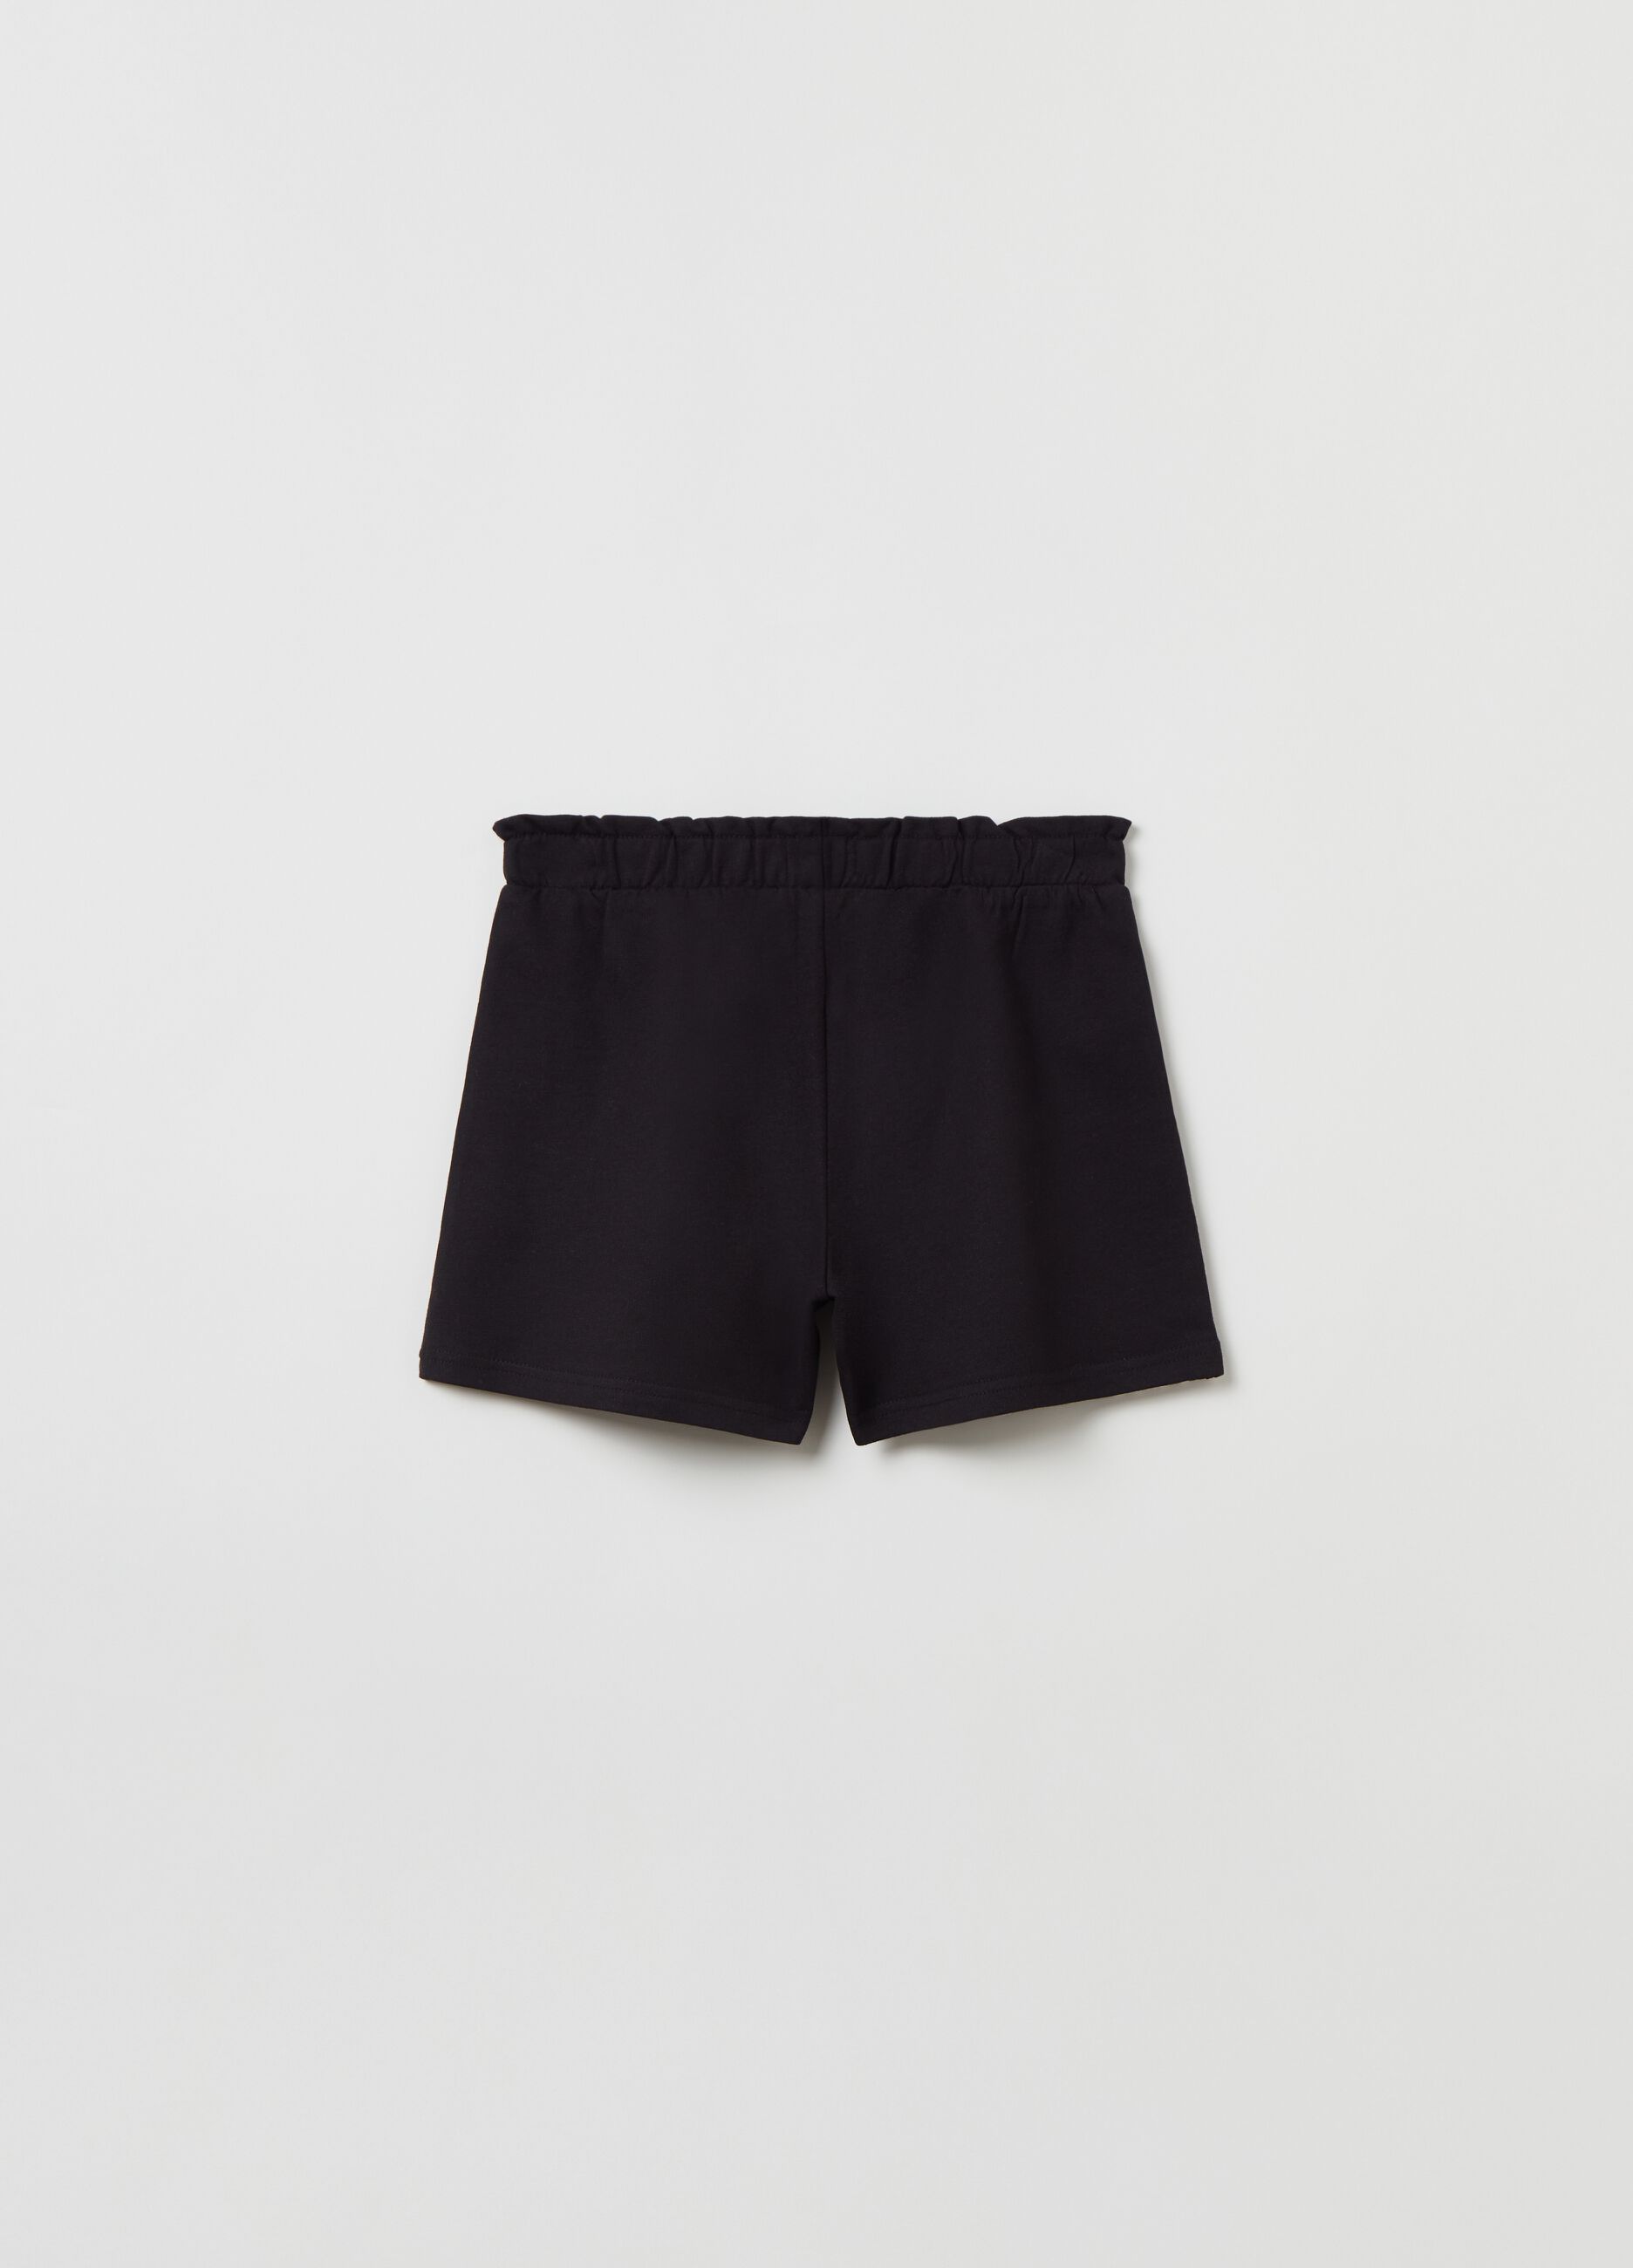 French terry shorts with contrasting bands